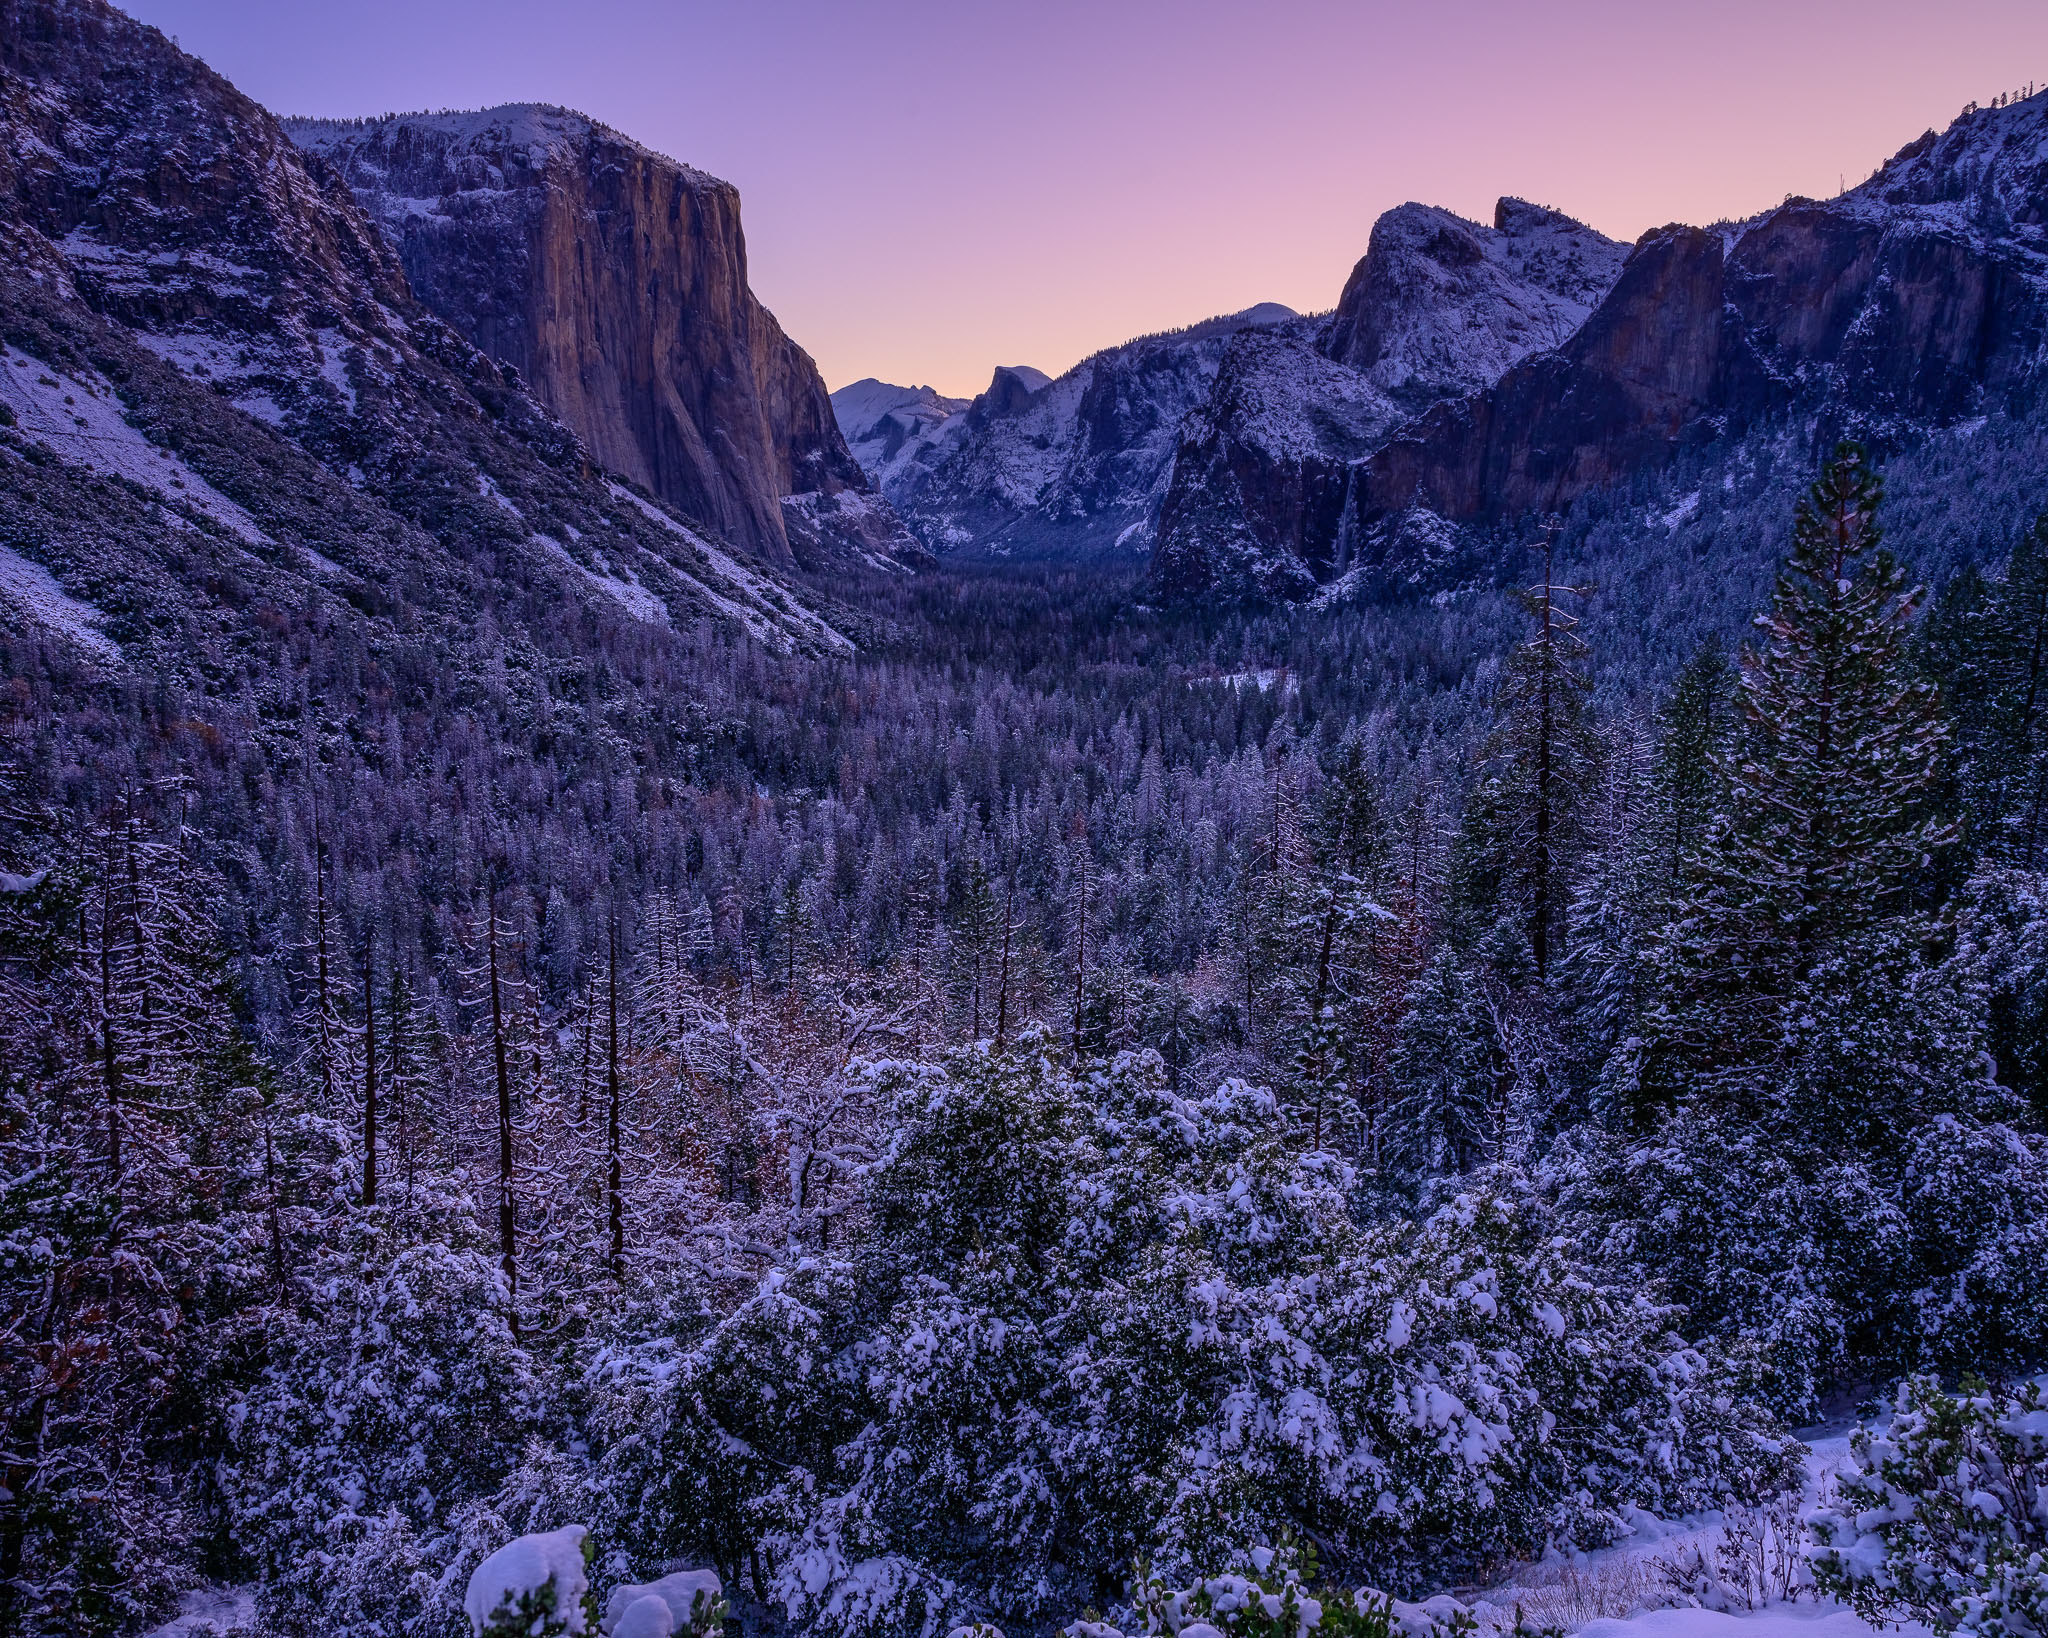 Sony Alpha 7 ii Camera Review ~ Tested At Yosemite National Park